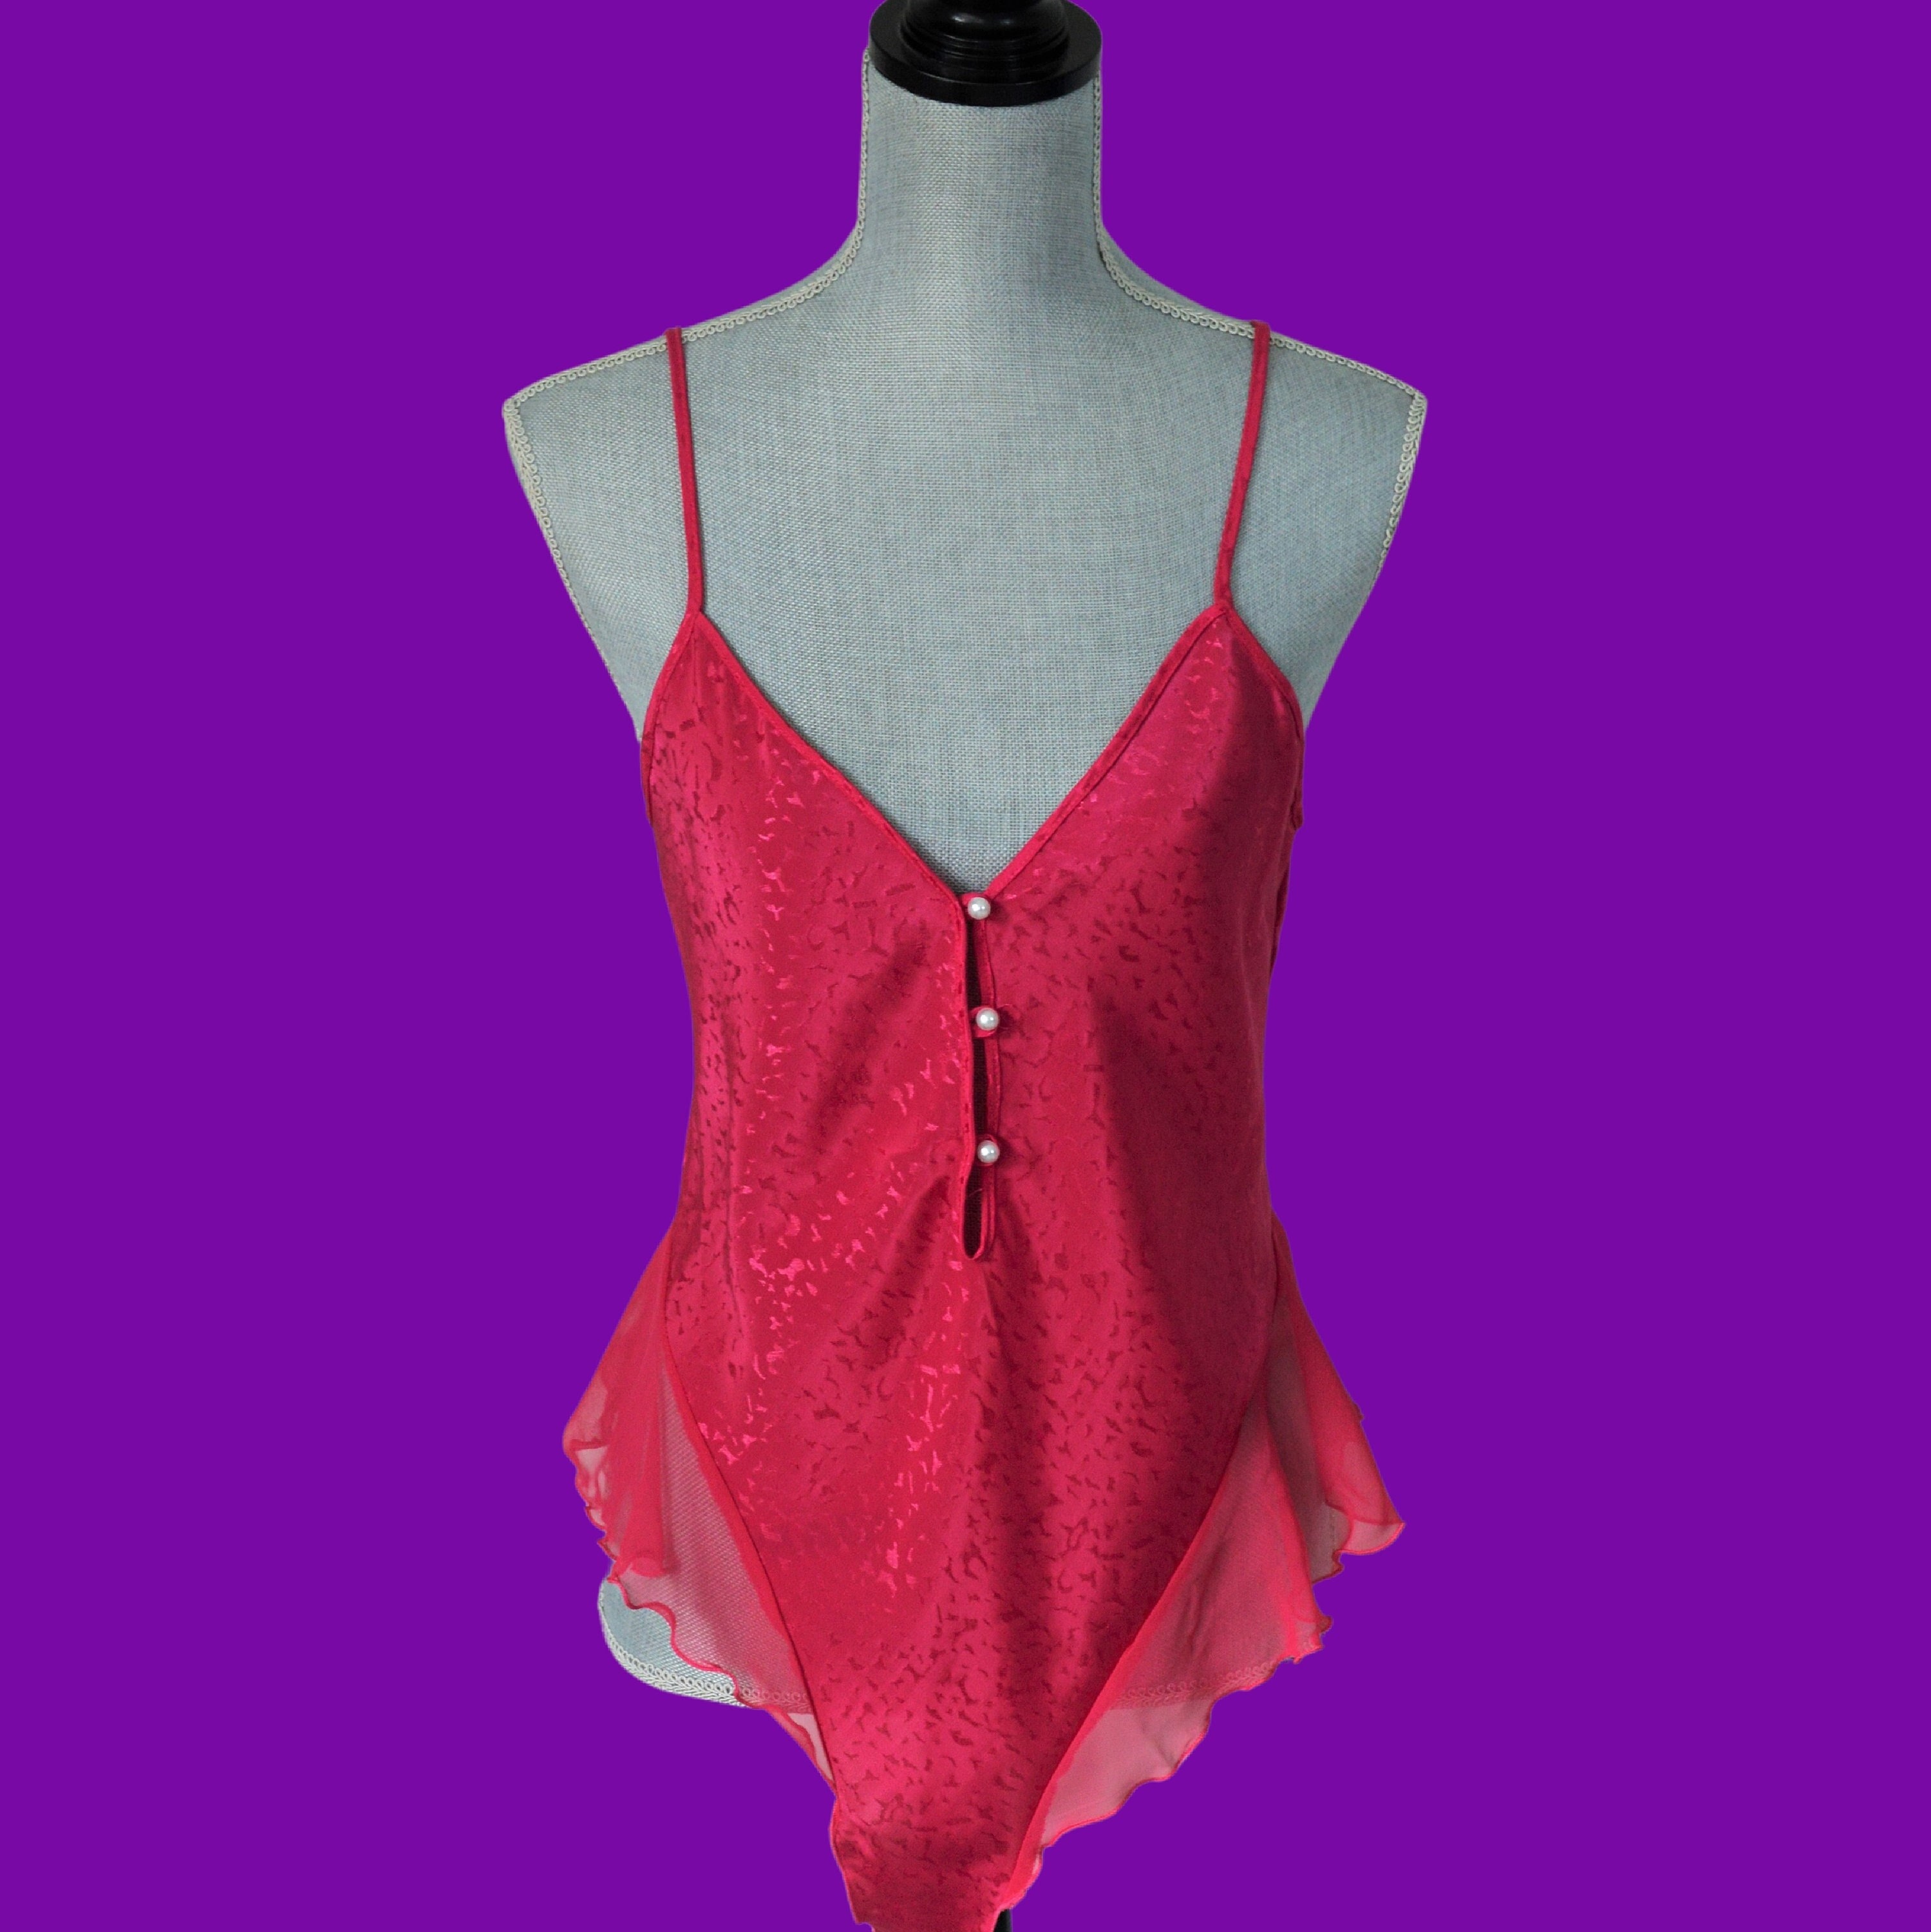 Vintage Red Lace Teddy playsuit romper lingerie Cheeky SZ M/6 90s retro Pin  Up 